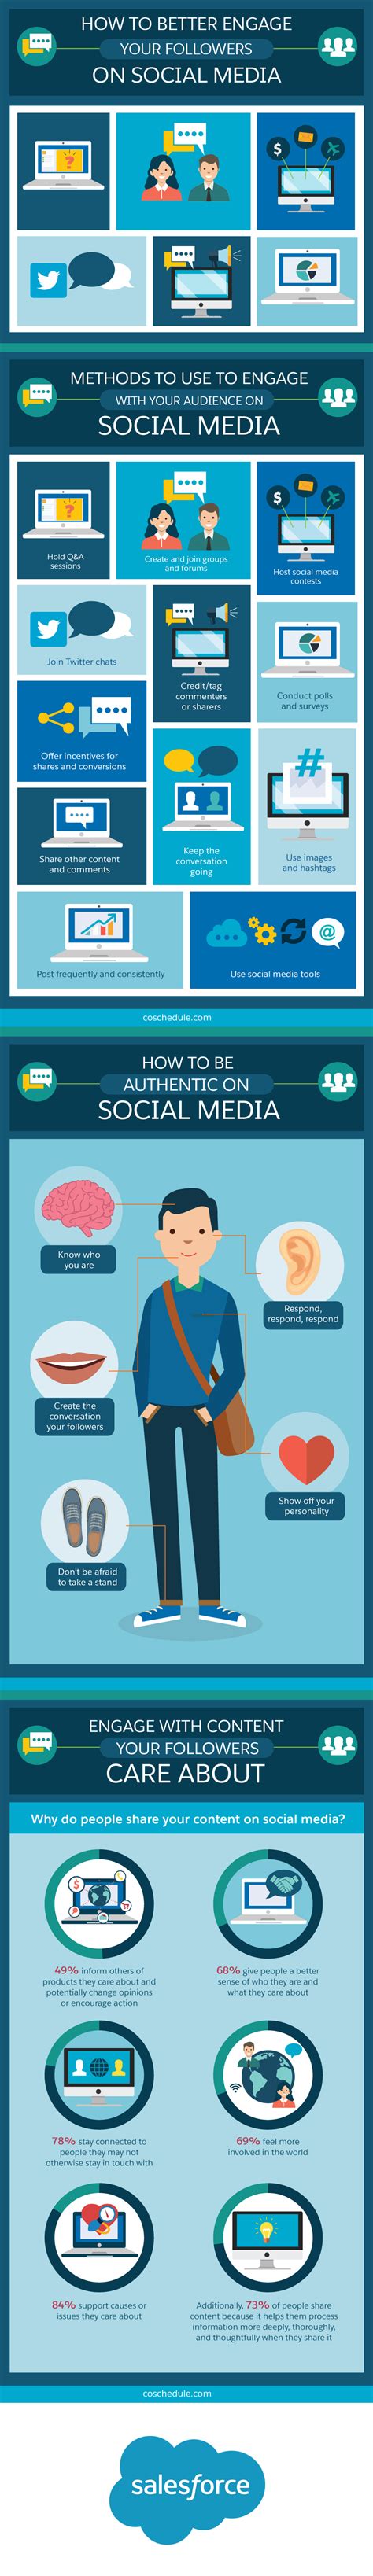 Top Tips For Engaging With Your Followers On Social Media Infographic